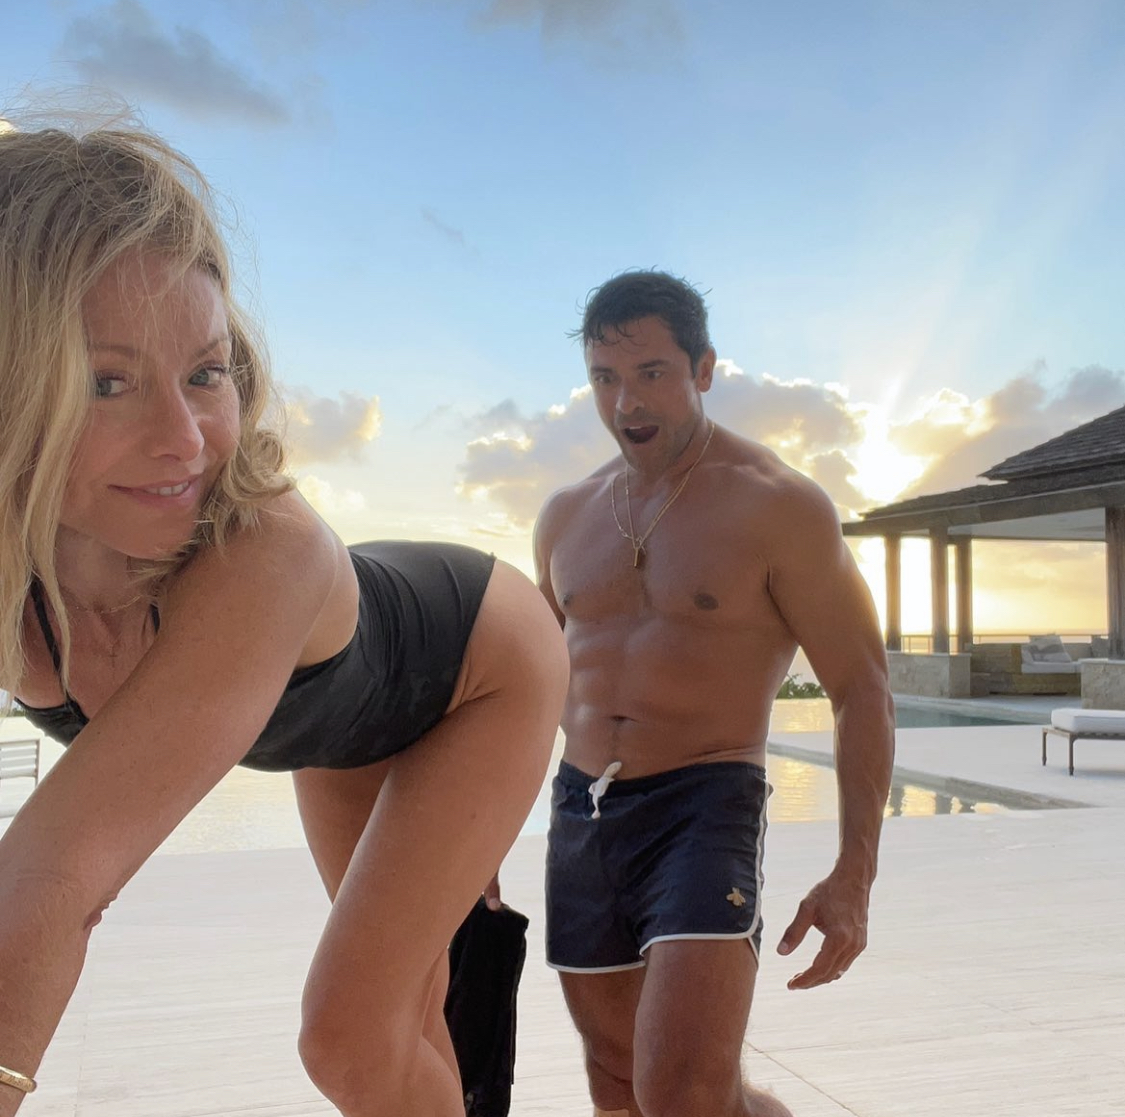 Beach Nude Flash - Kelly Ripa and Mark Consuelos: A Timeline of Their Relationship